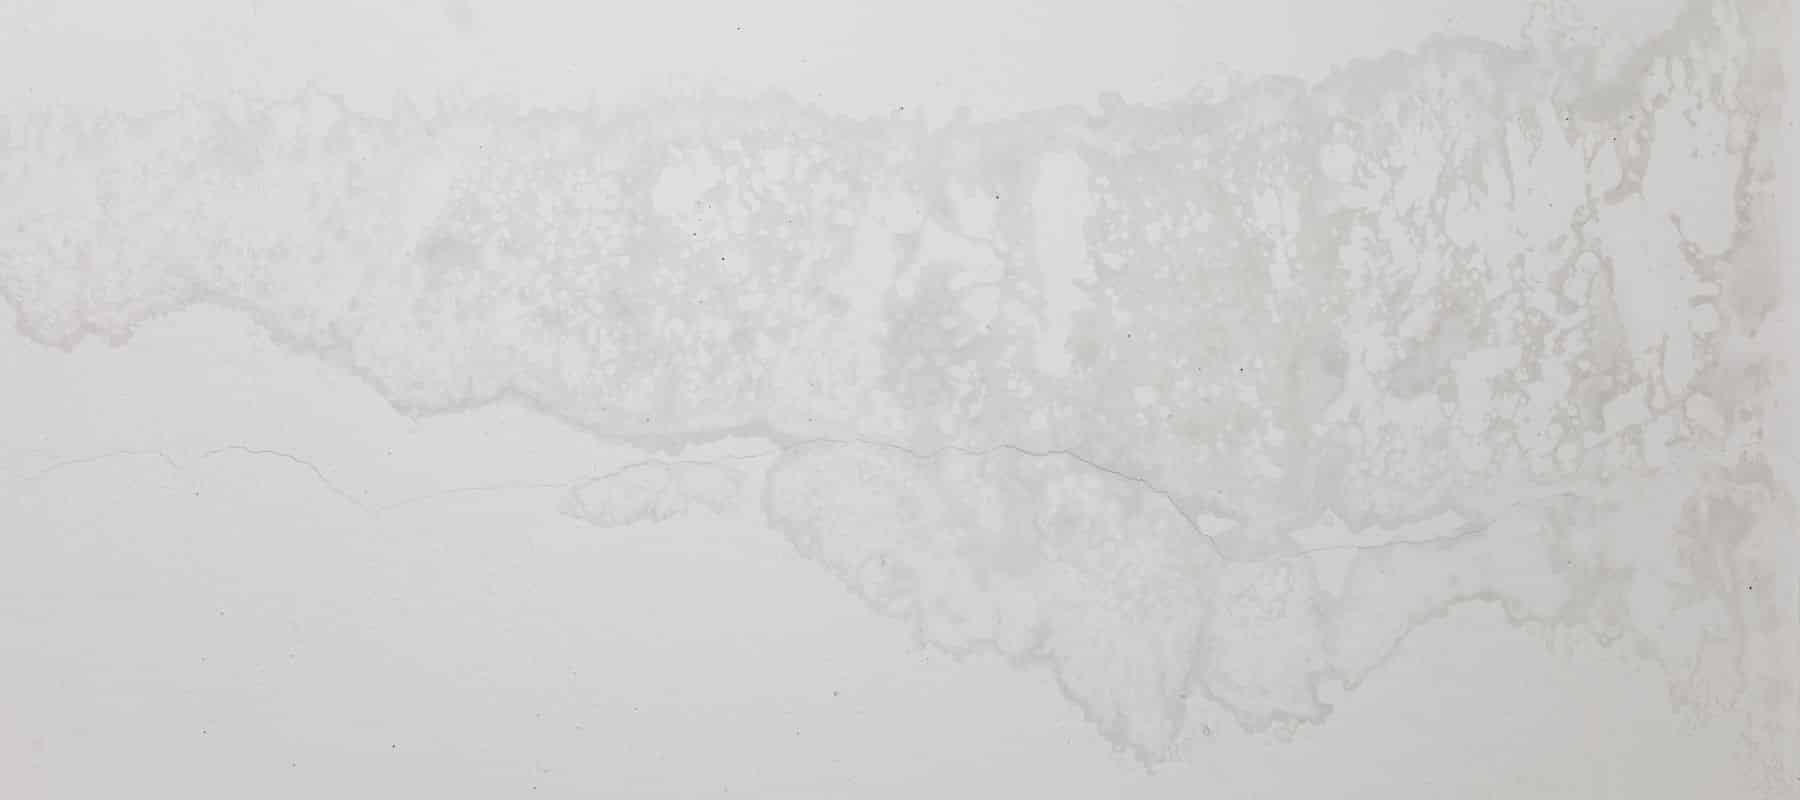 A white wall with water seeping through it.